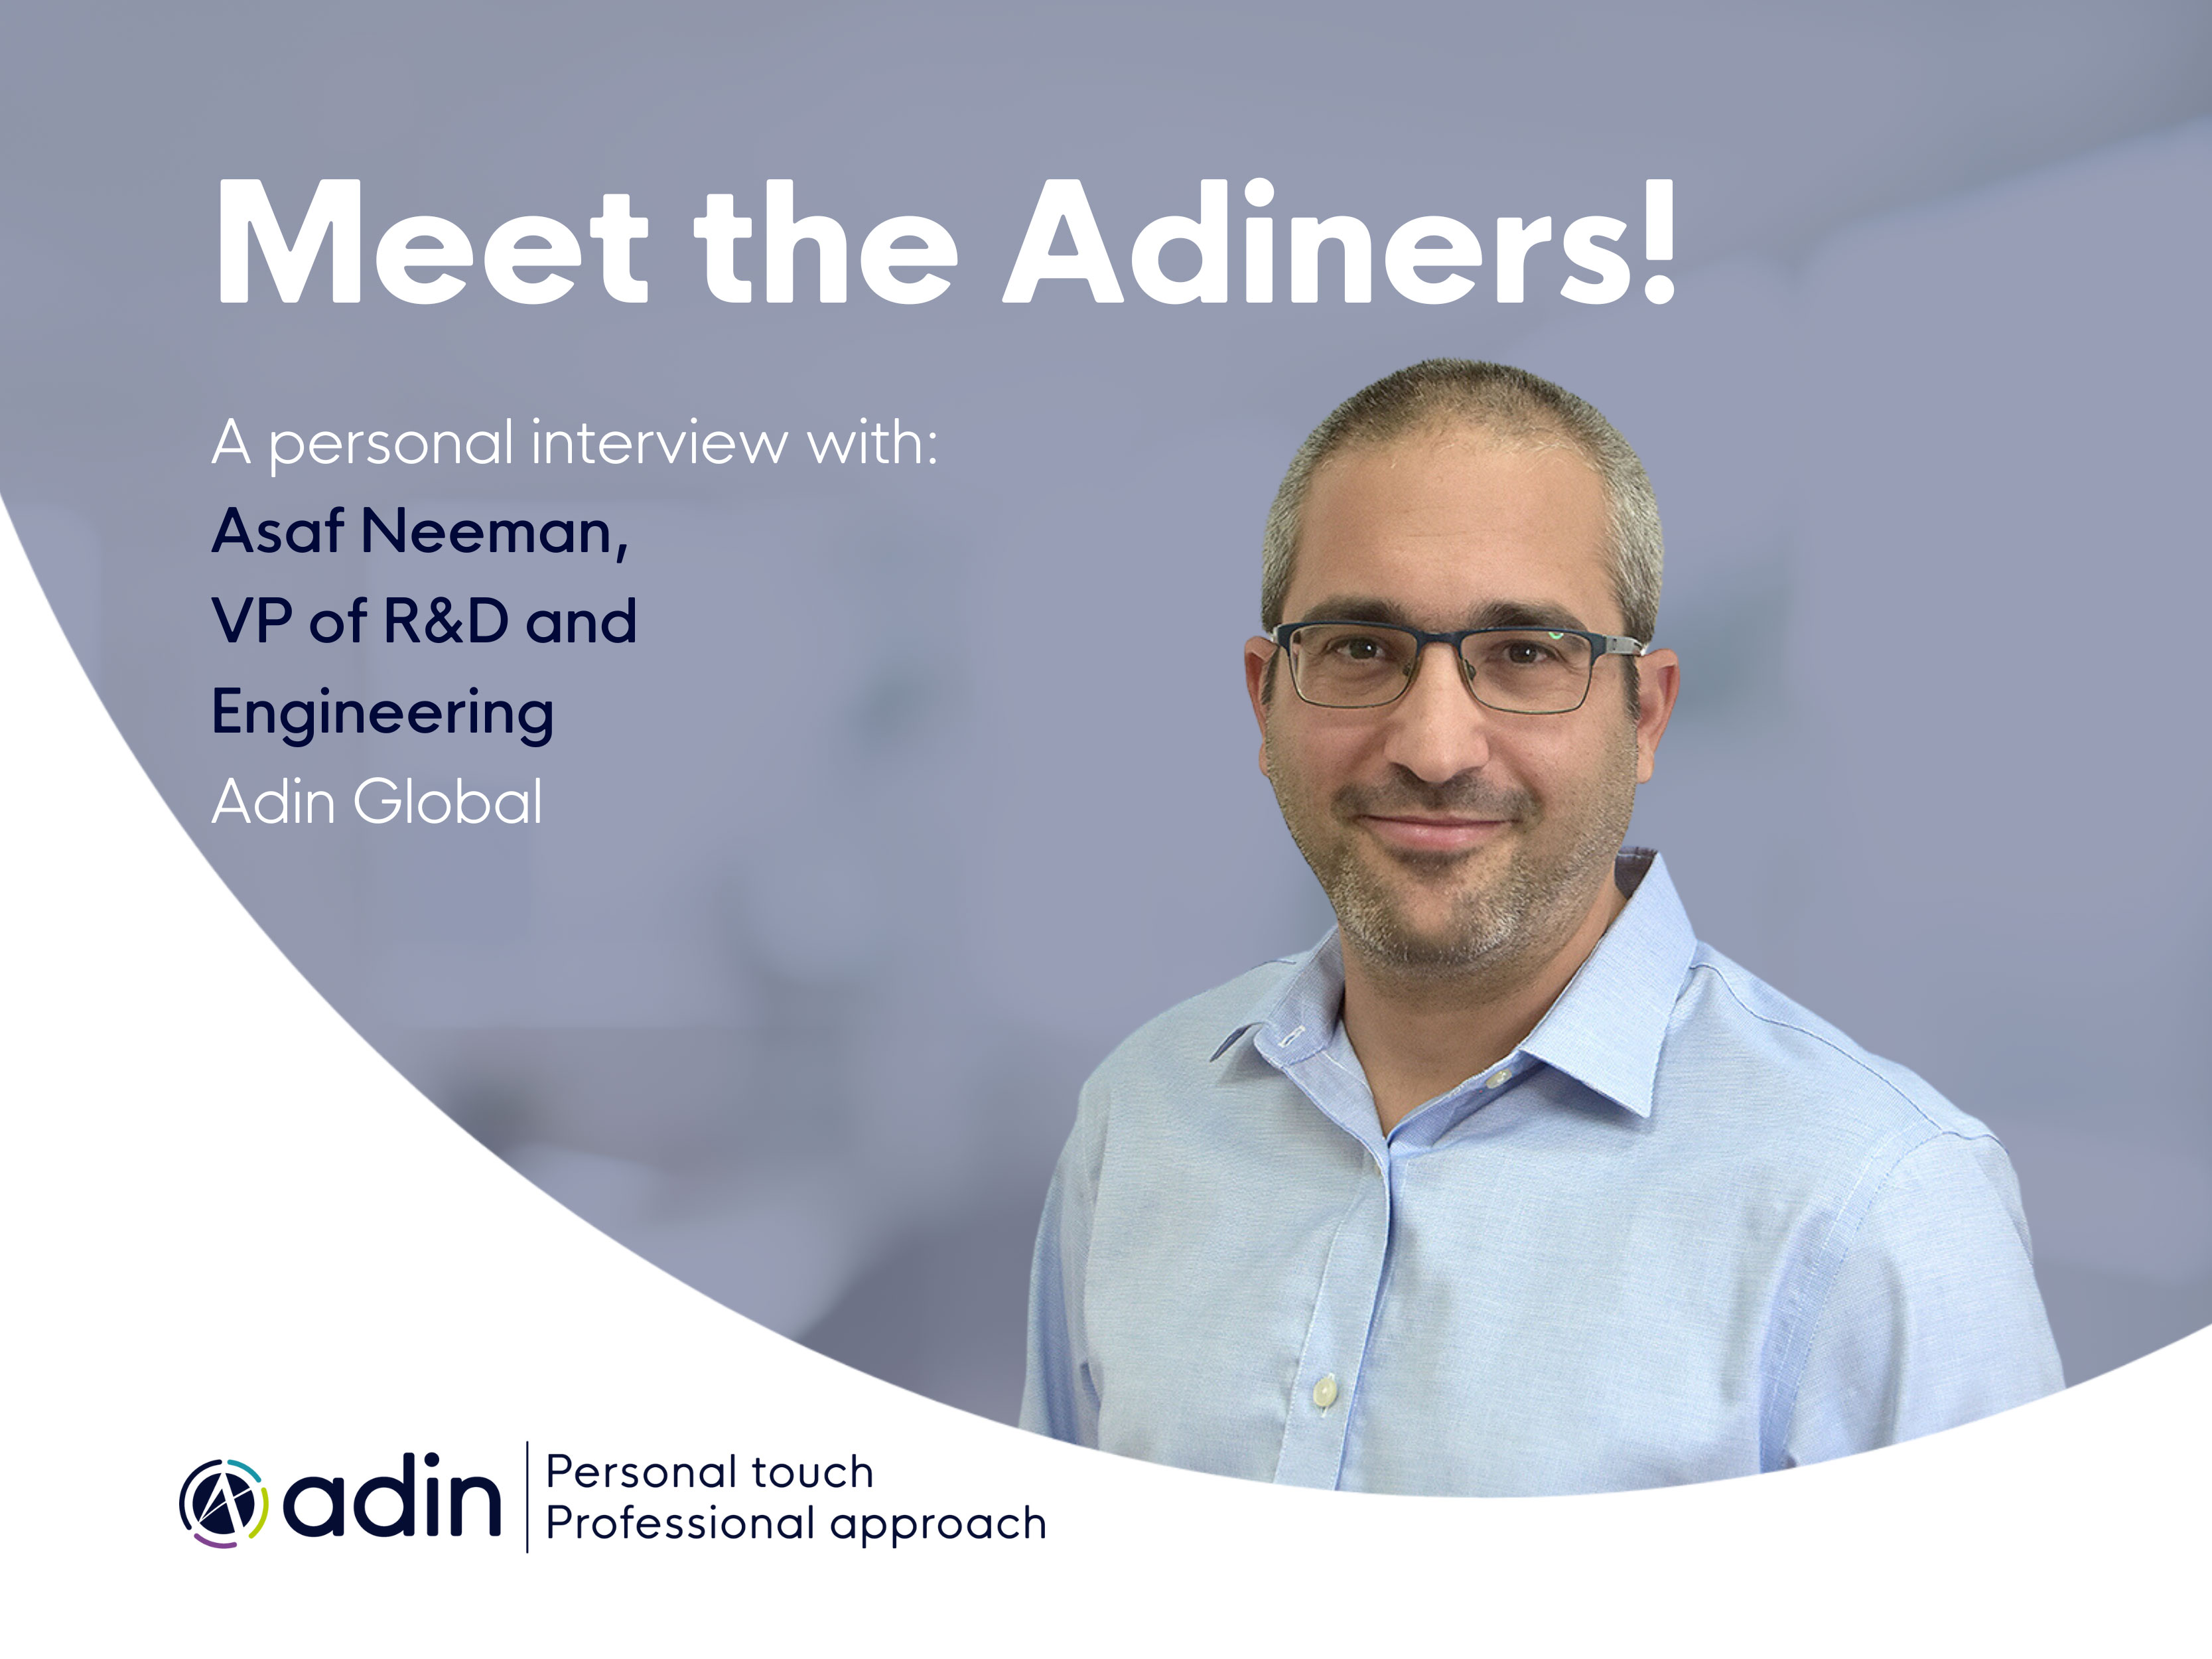 Meet the Adiners: An interview with Asaf Neeman, VP of R&D and Engineering